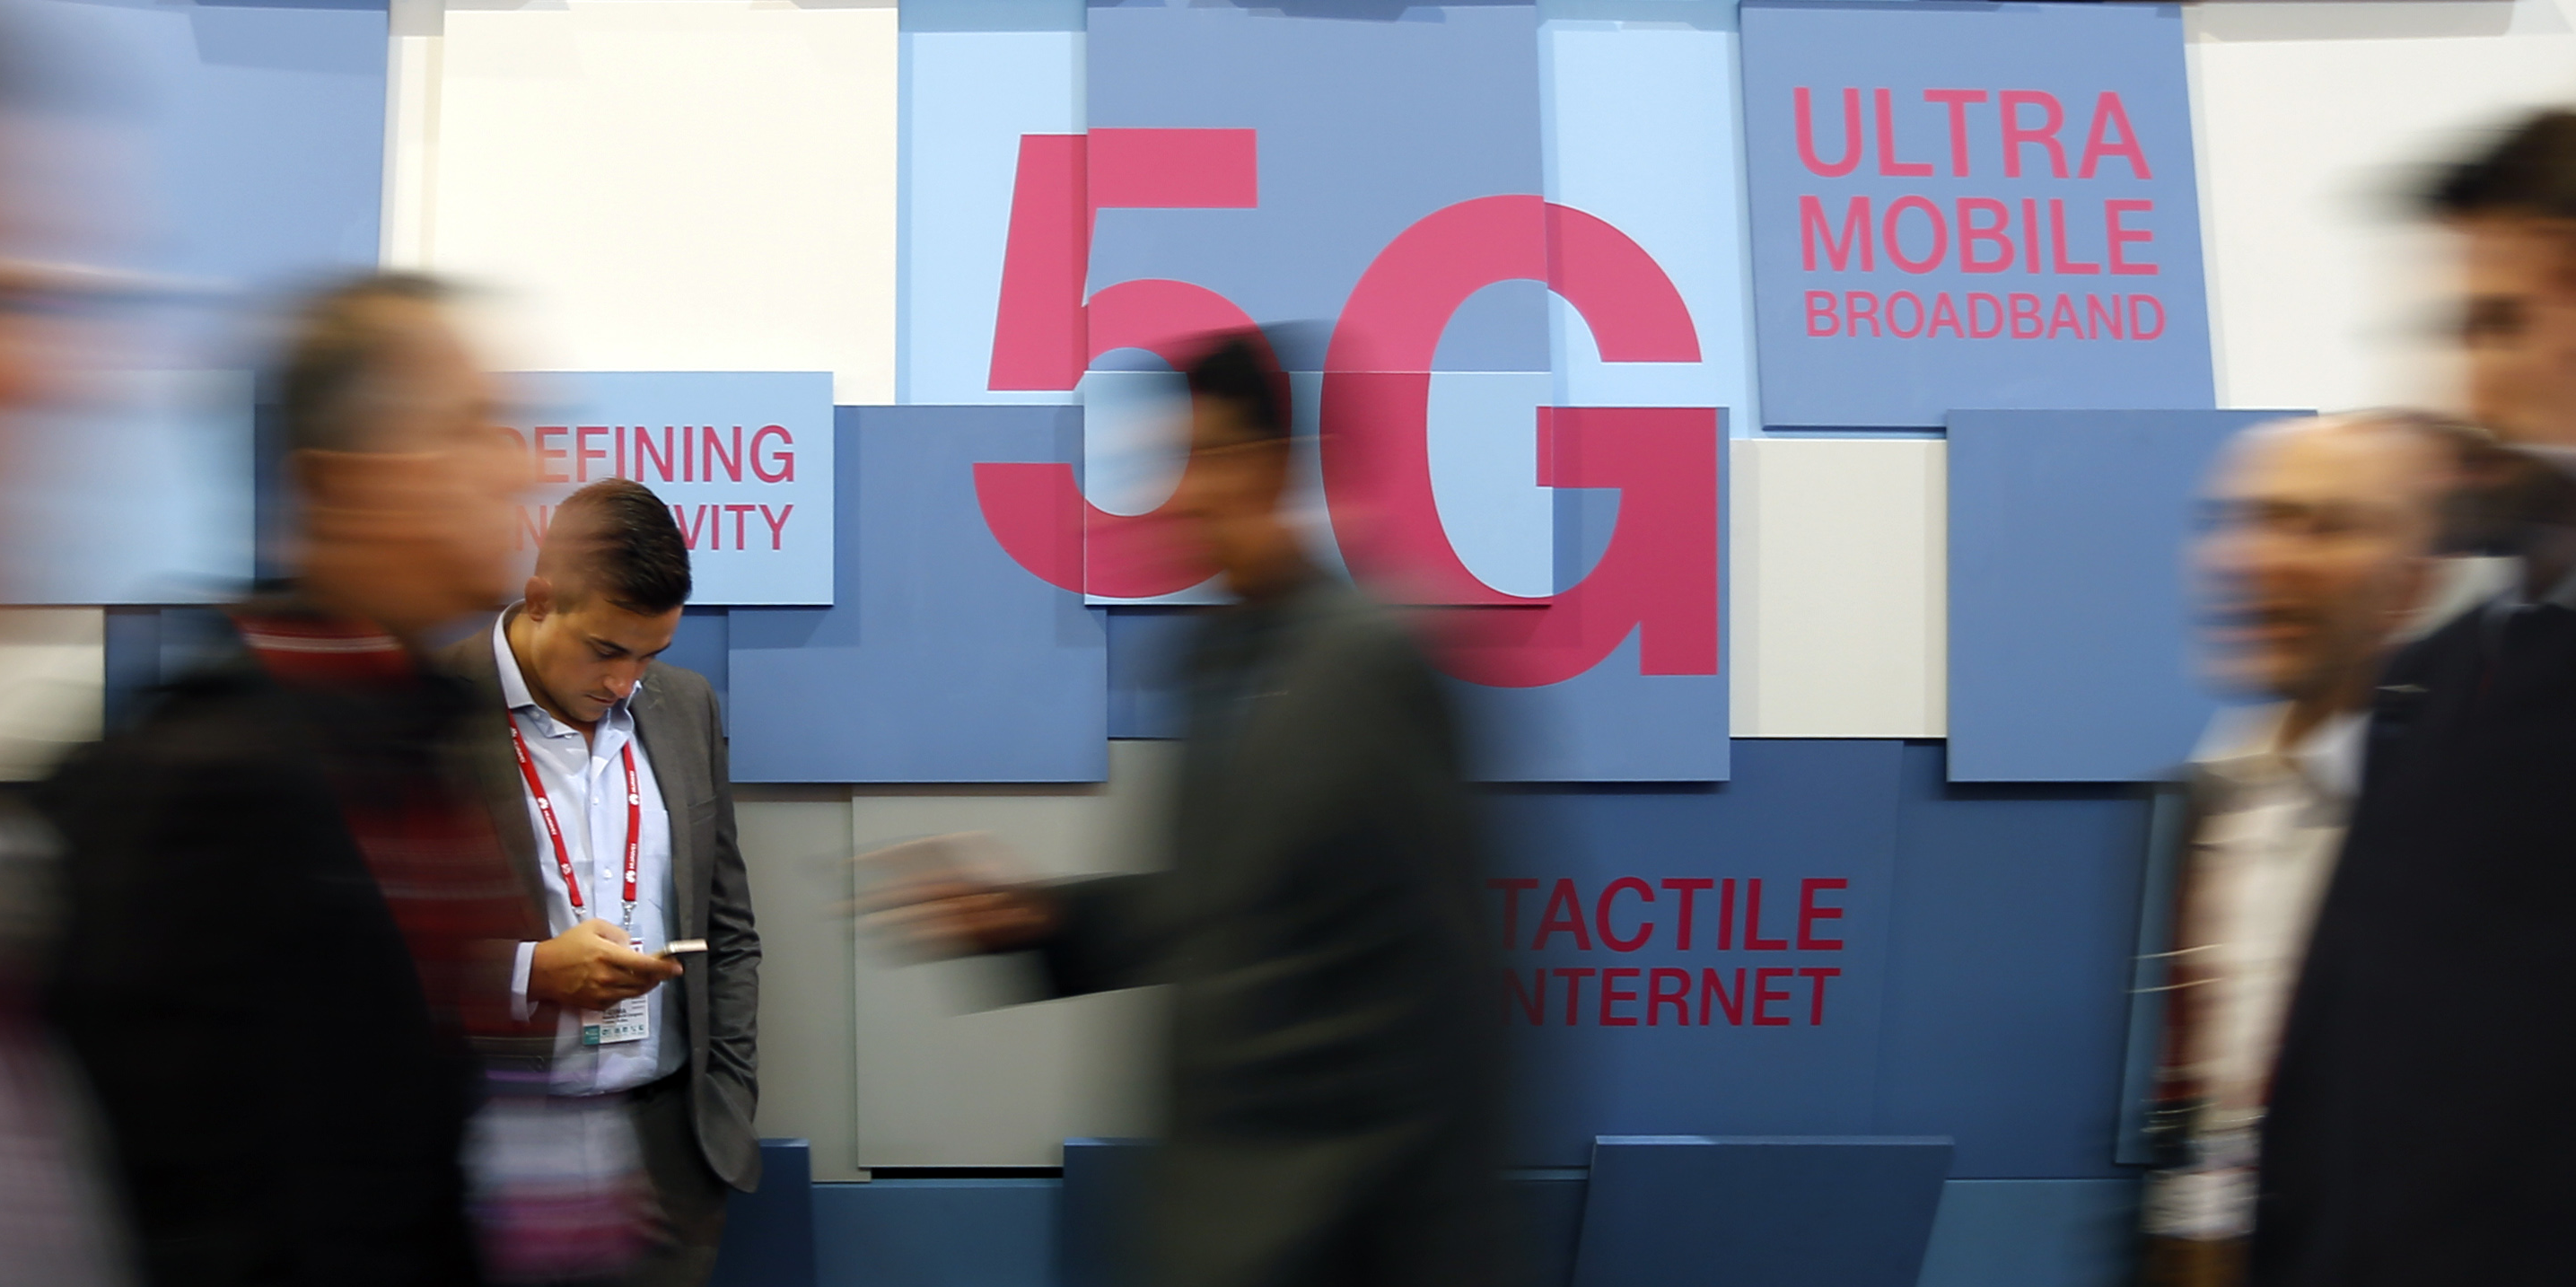 mobile-world-congress-5g-cloud-iot-french-tech-internet-des-objets-telephonie-telecoms-barcelone-2016-02-23